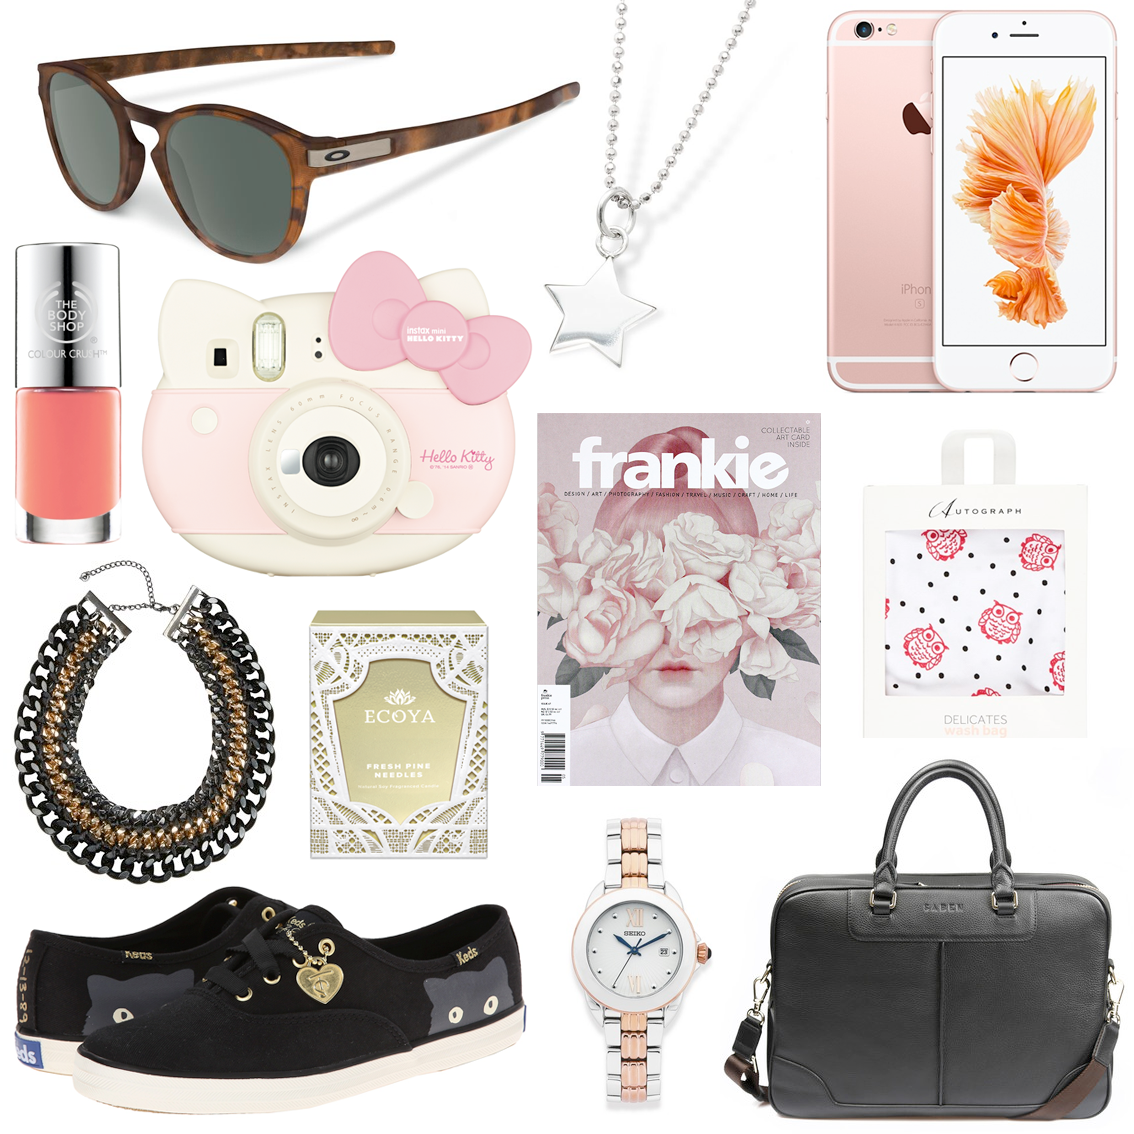 Gift ideas for fashionable babes // Oakley Latch Sunglasses $179.99 | Gala Darling Mystical Manifest Pendant Charm, $79.00 | Apple iPhone 6S, from $1199.00 | The Body Shop Colour Crush™ Nail Polish, $12.95 | Fujifilm Hello Kitty Instax Mini, $179.99 | City Chic Chain Rope Plait Necklace, $44.99 | ECOYA Fresh Pine Needles Madison Jar, $49.95 | Frankie Magazine | Autograph Owl Wash Bag, AUD $9.99 | Keds x Taylor Swift Sneaky Cat Shoes, $79.95 | Seiko Watch, $599.00 | Saben Briefcase, $489.00